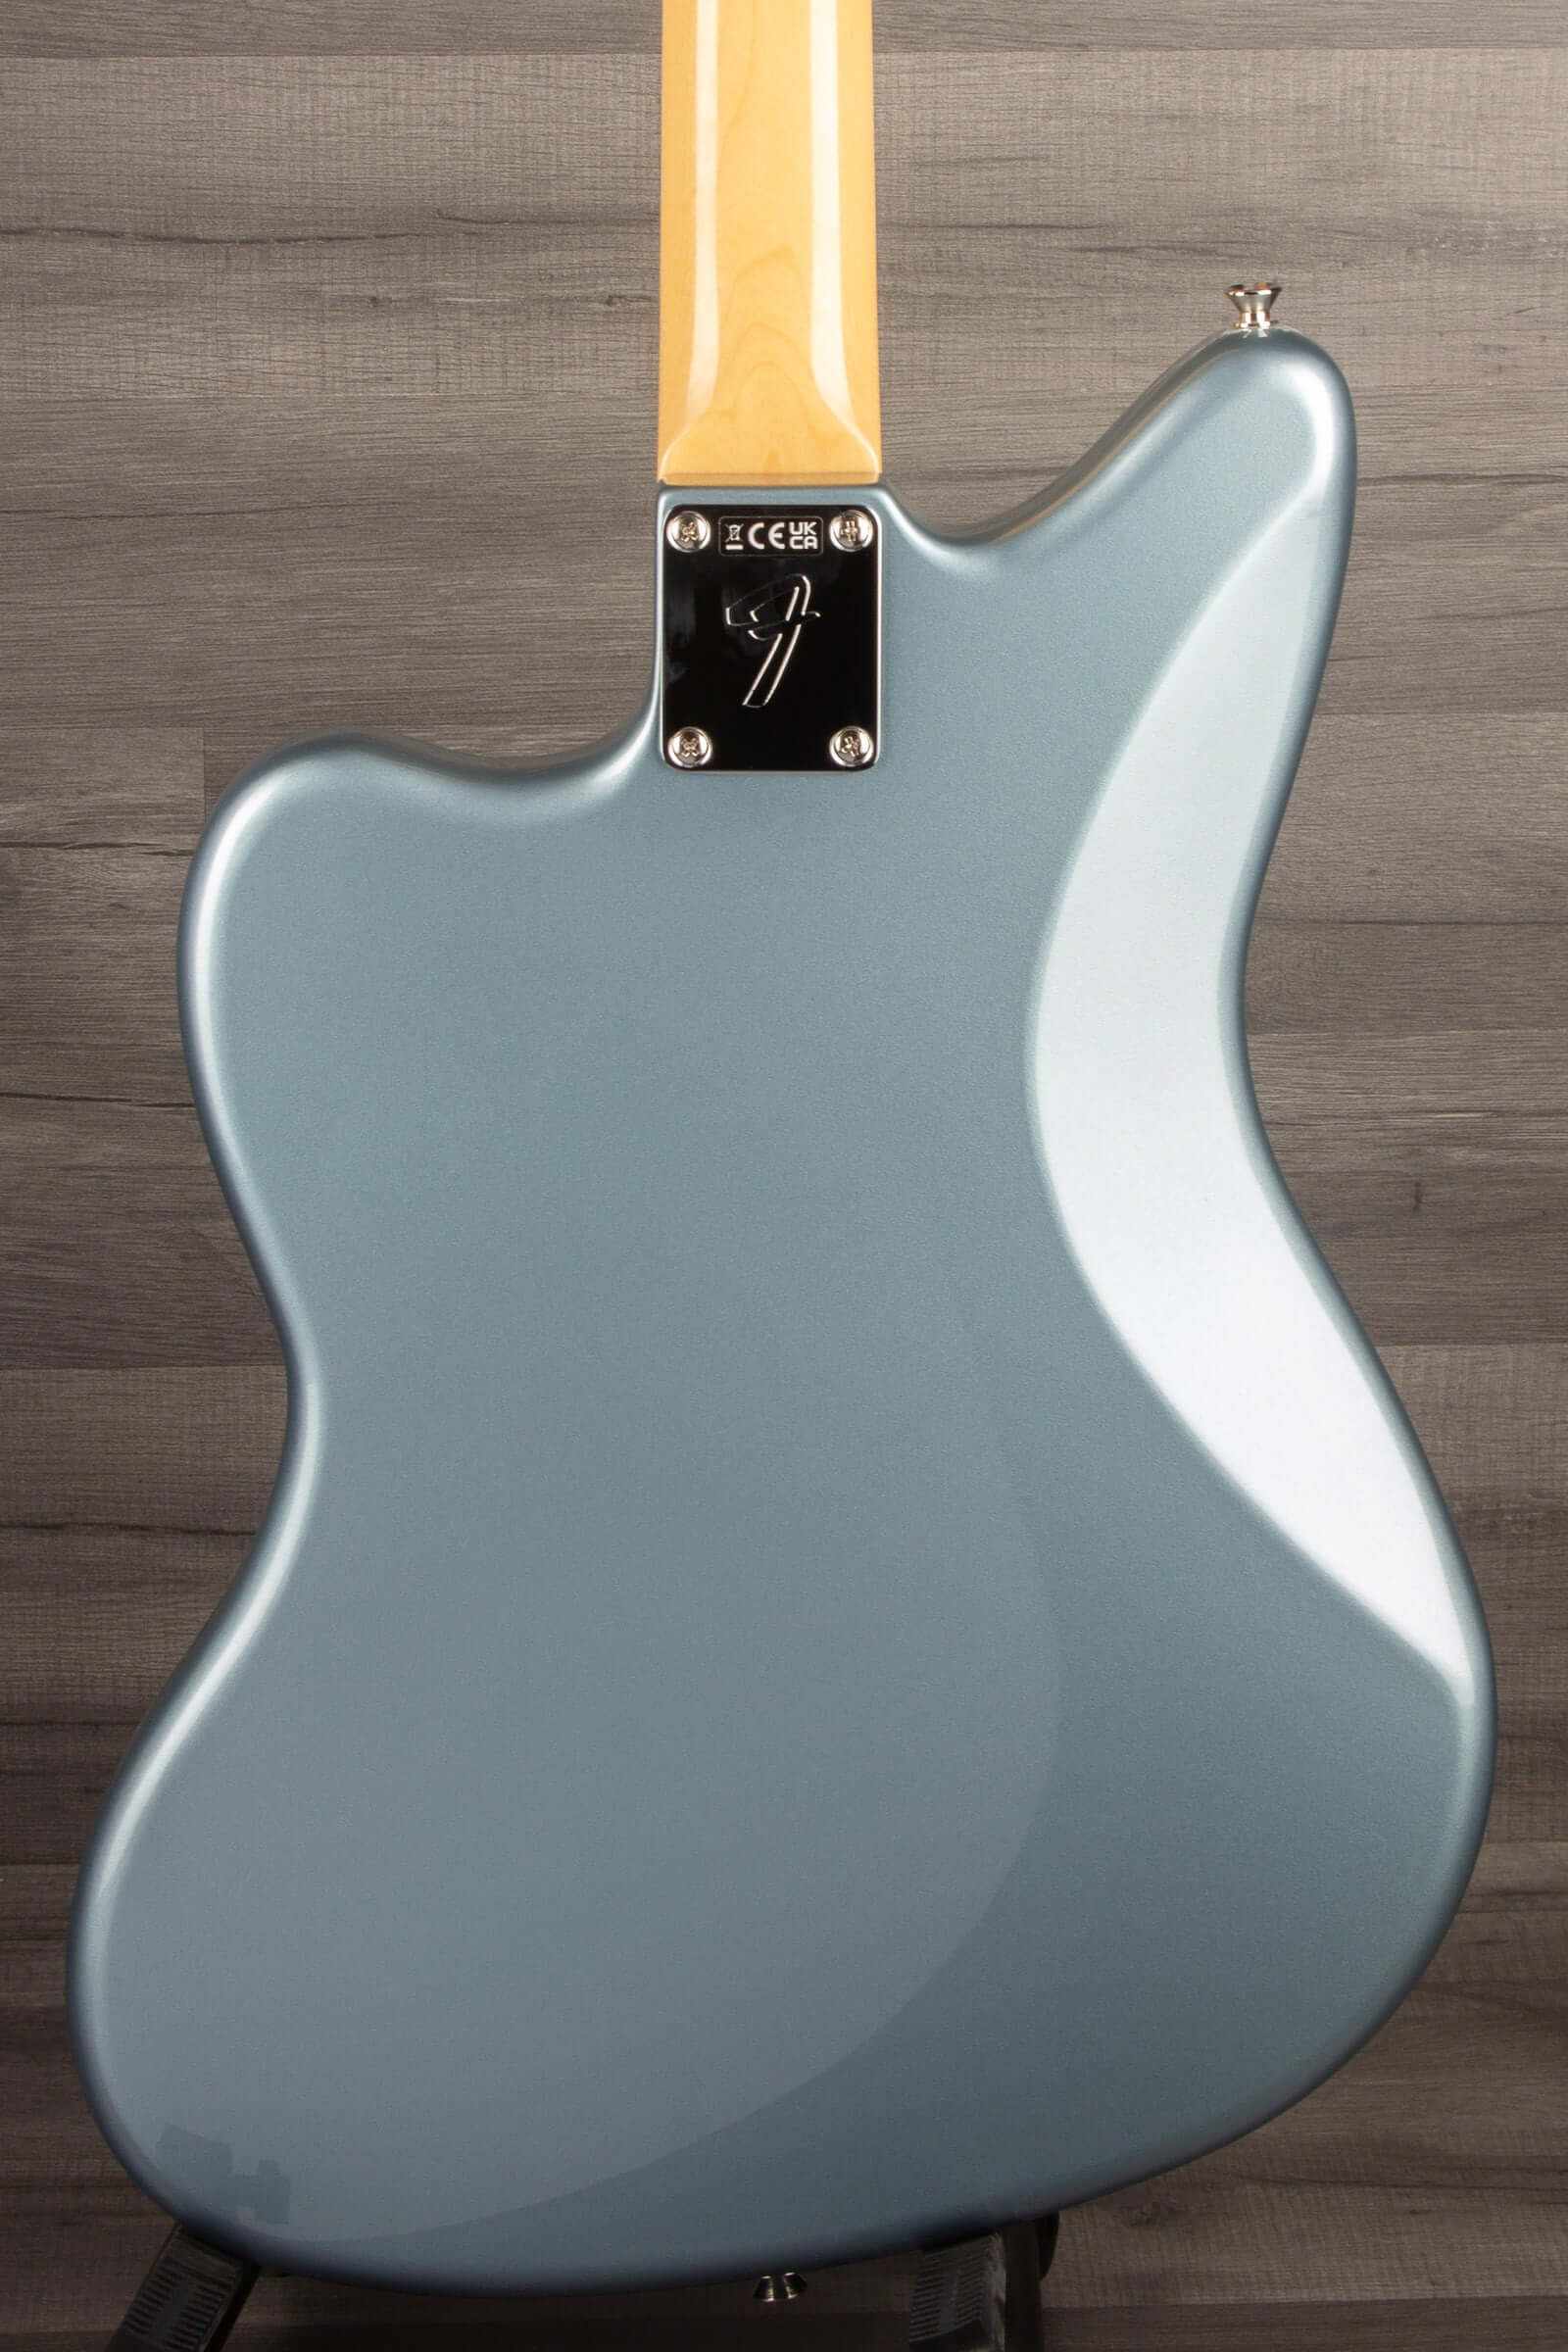 Fender - Traditional Late 60s Jazzmaster® Ice Blue Metallic - Made in Japan